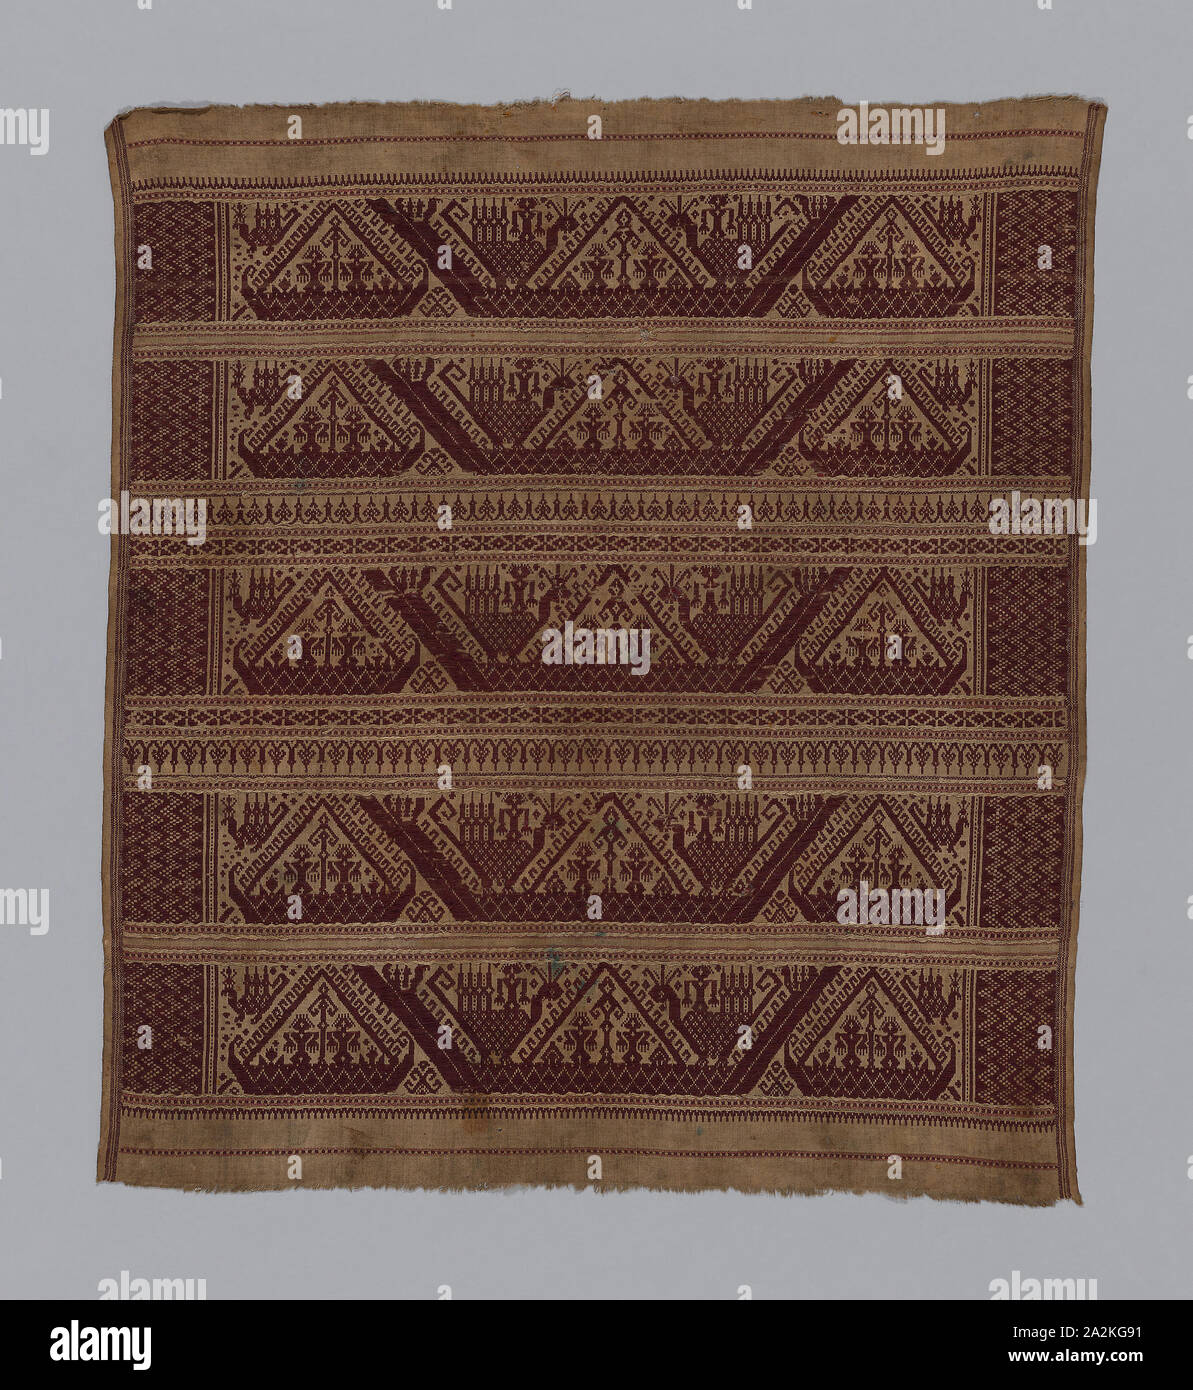 Tampan (Ceremonial Cloth), 19th century, Indonesia, South Sumatra, Pasisir or coastal area, Indonesia, Cotton and gilt-animal-substrate-wrapped hemp, plain weave with supplementary patterning wefts, 73.6 x 66.1 cm (29 x 26 in Stock Photo